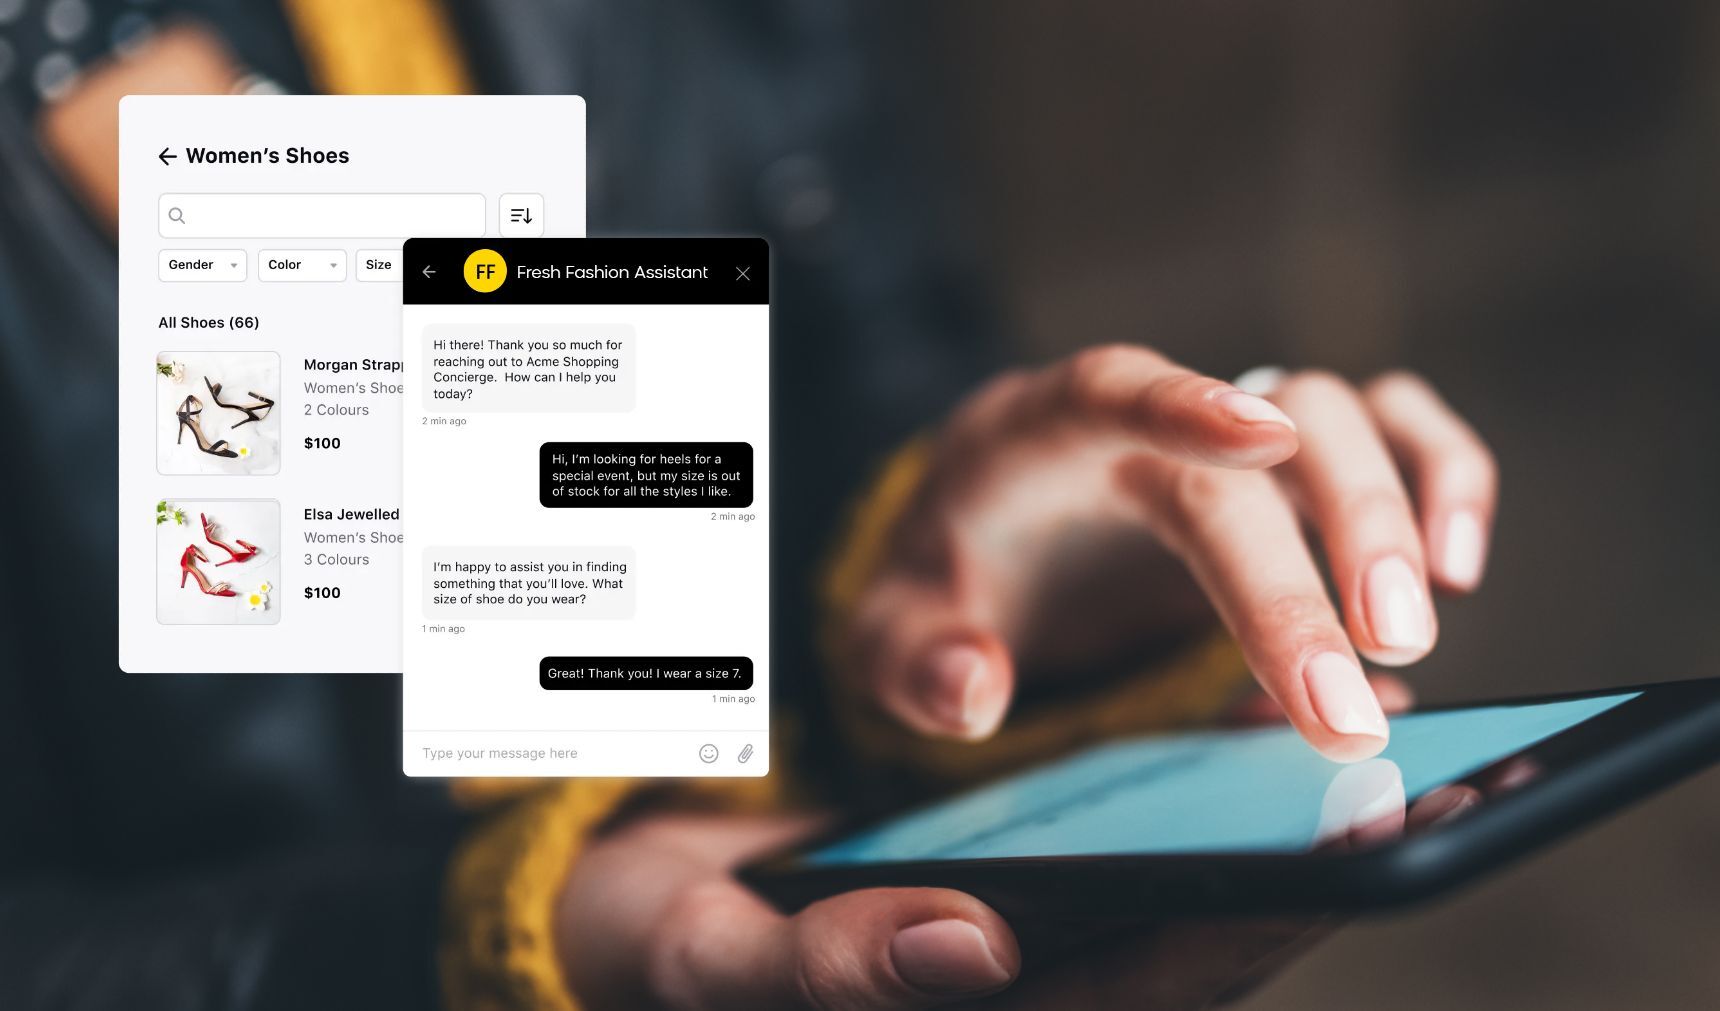 Conversational commerce is the wave of the future in e-commerce